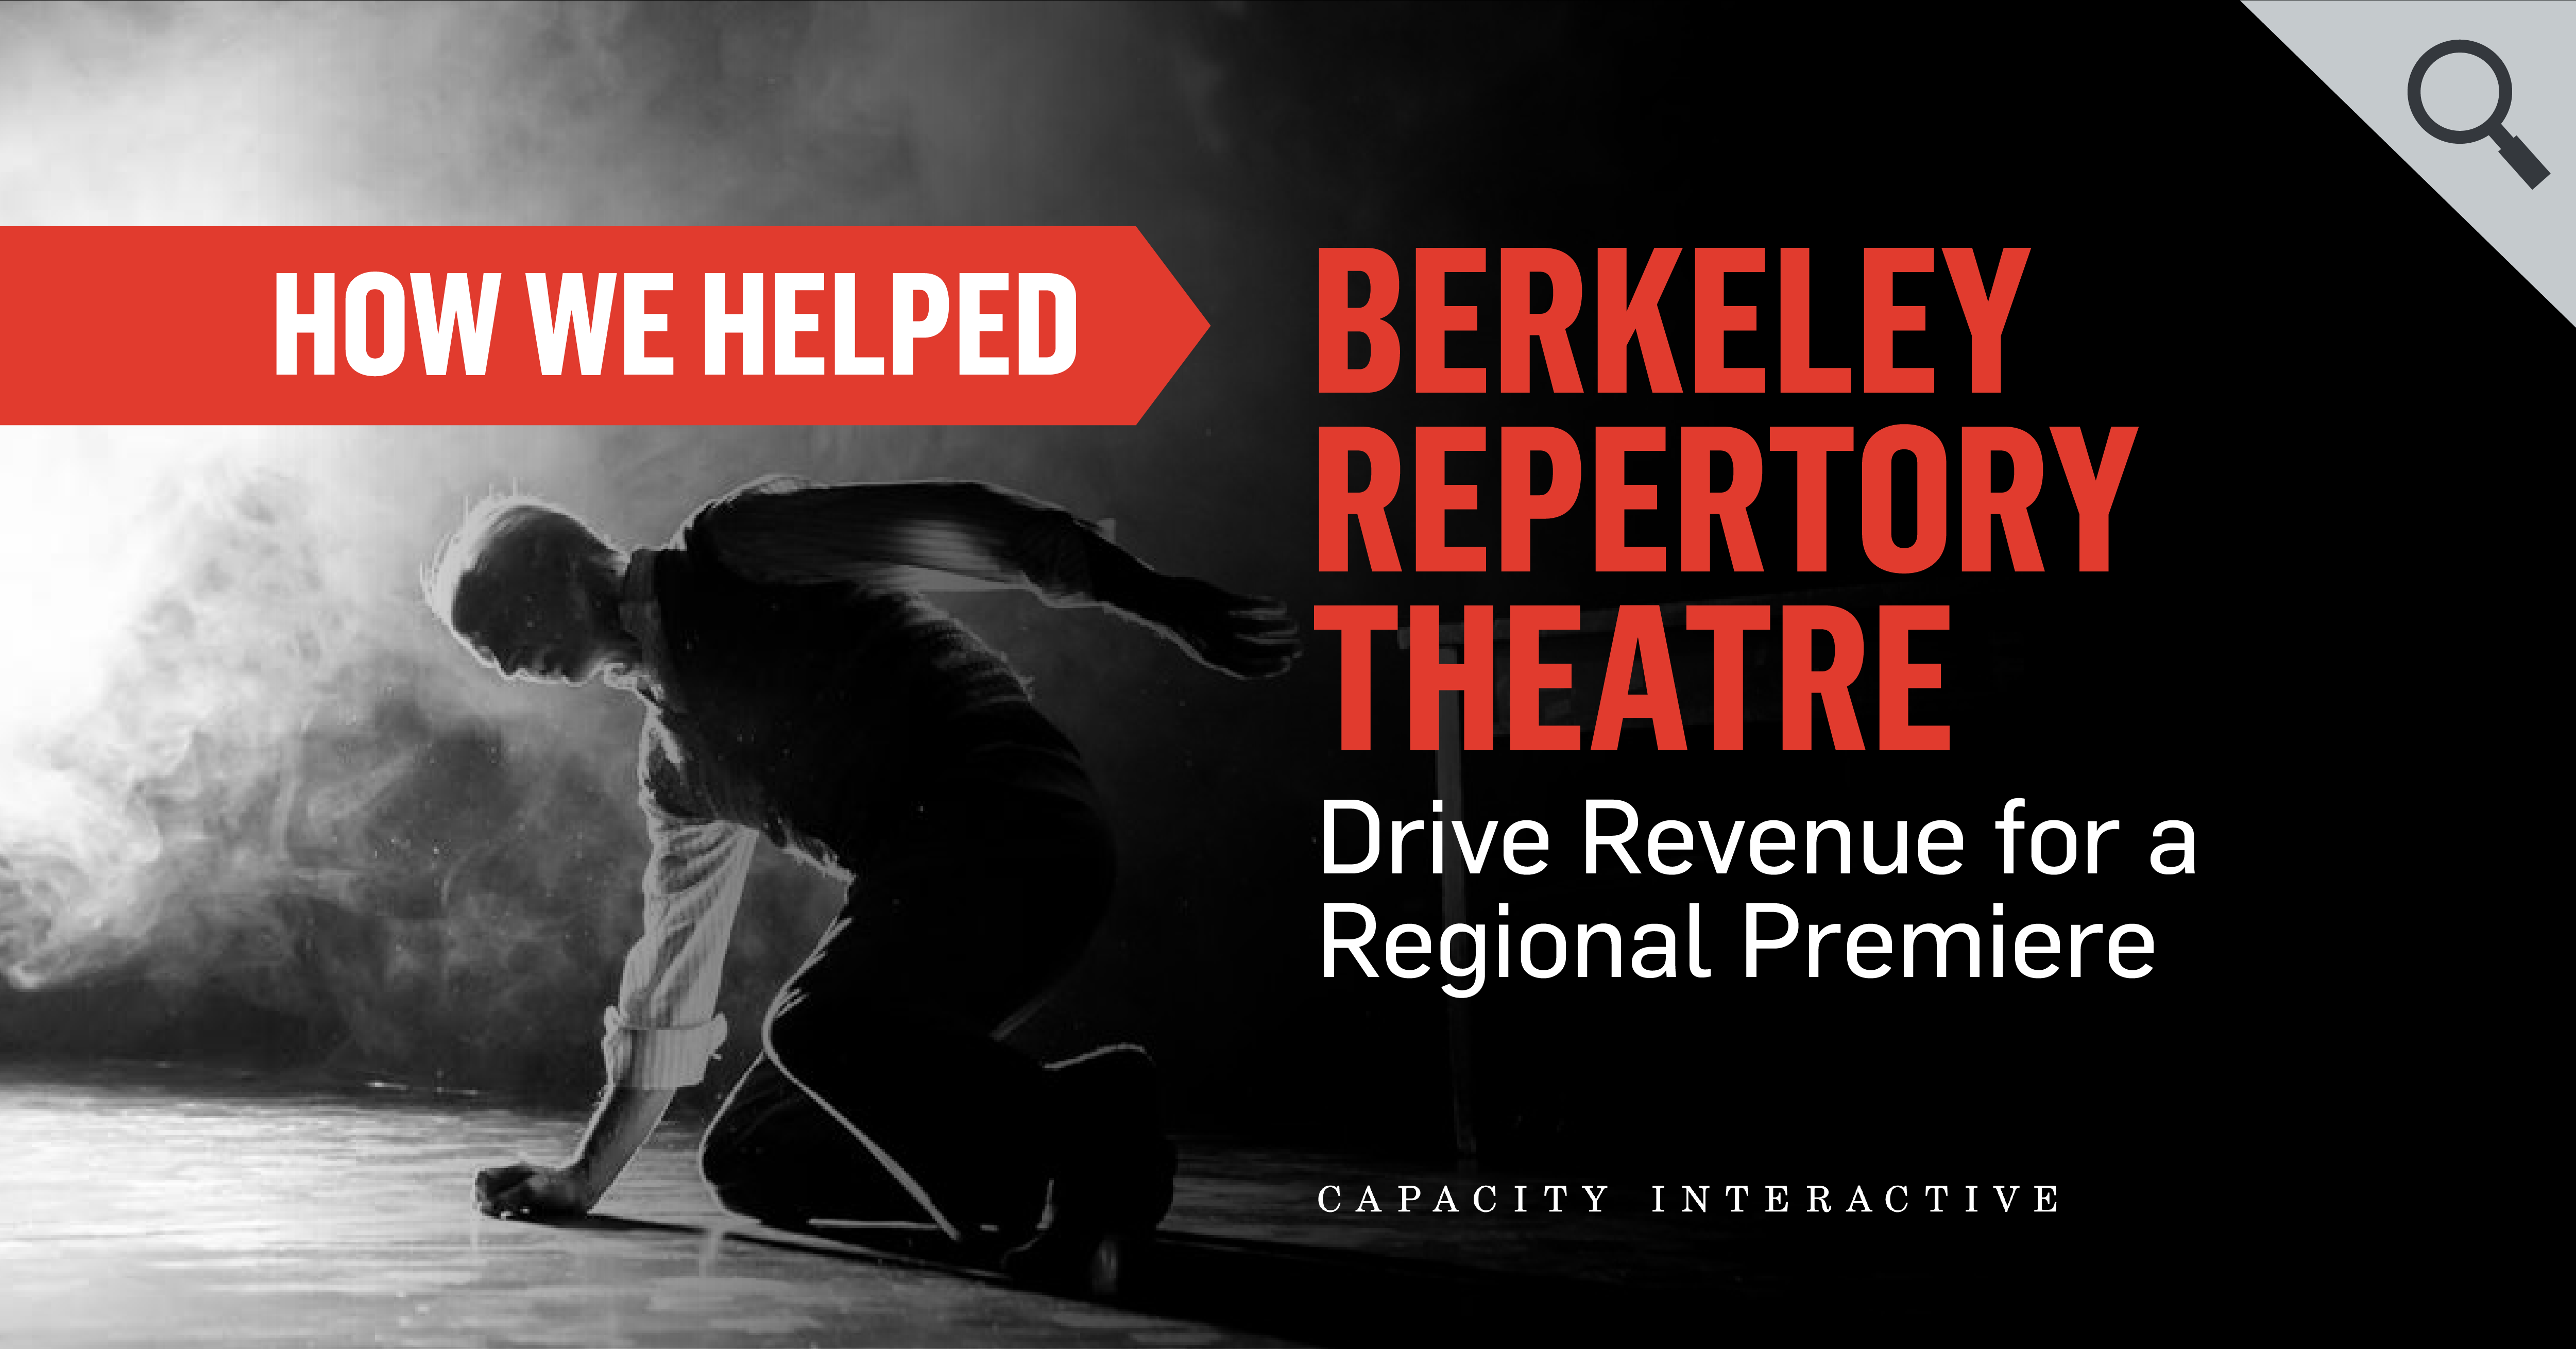 How We Helped Berkeley Repertory Theatre Drive Revenue for a Regional Premiere